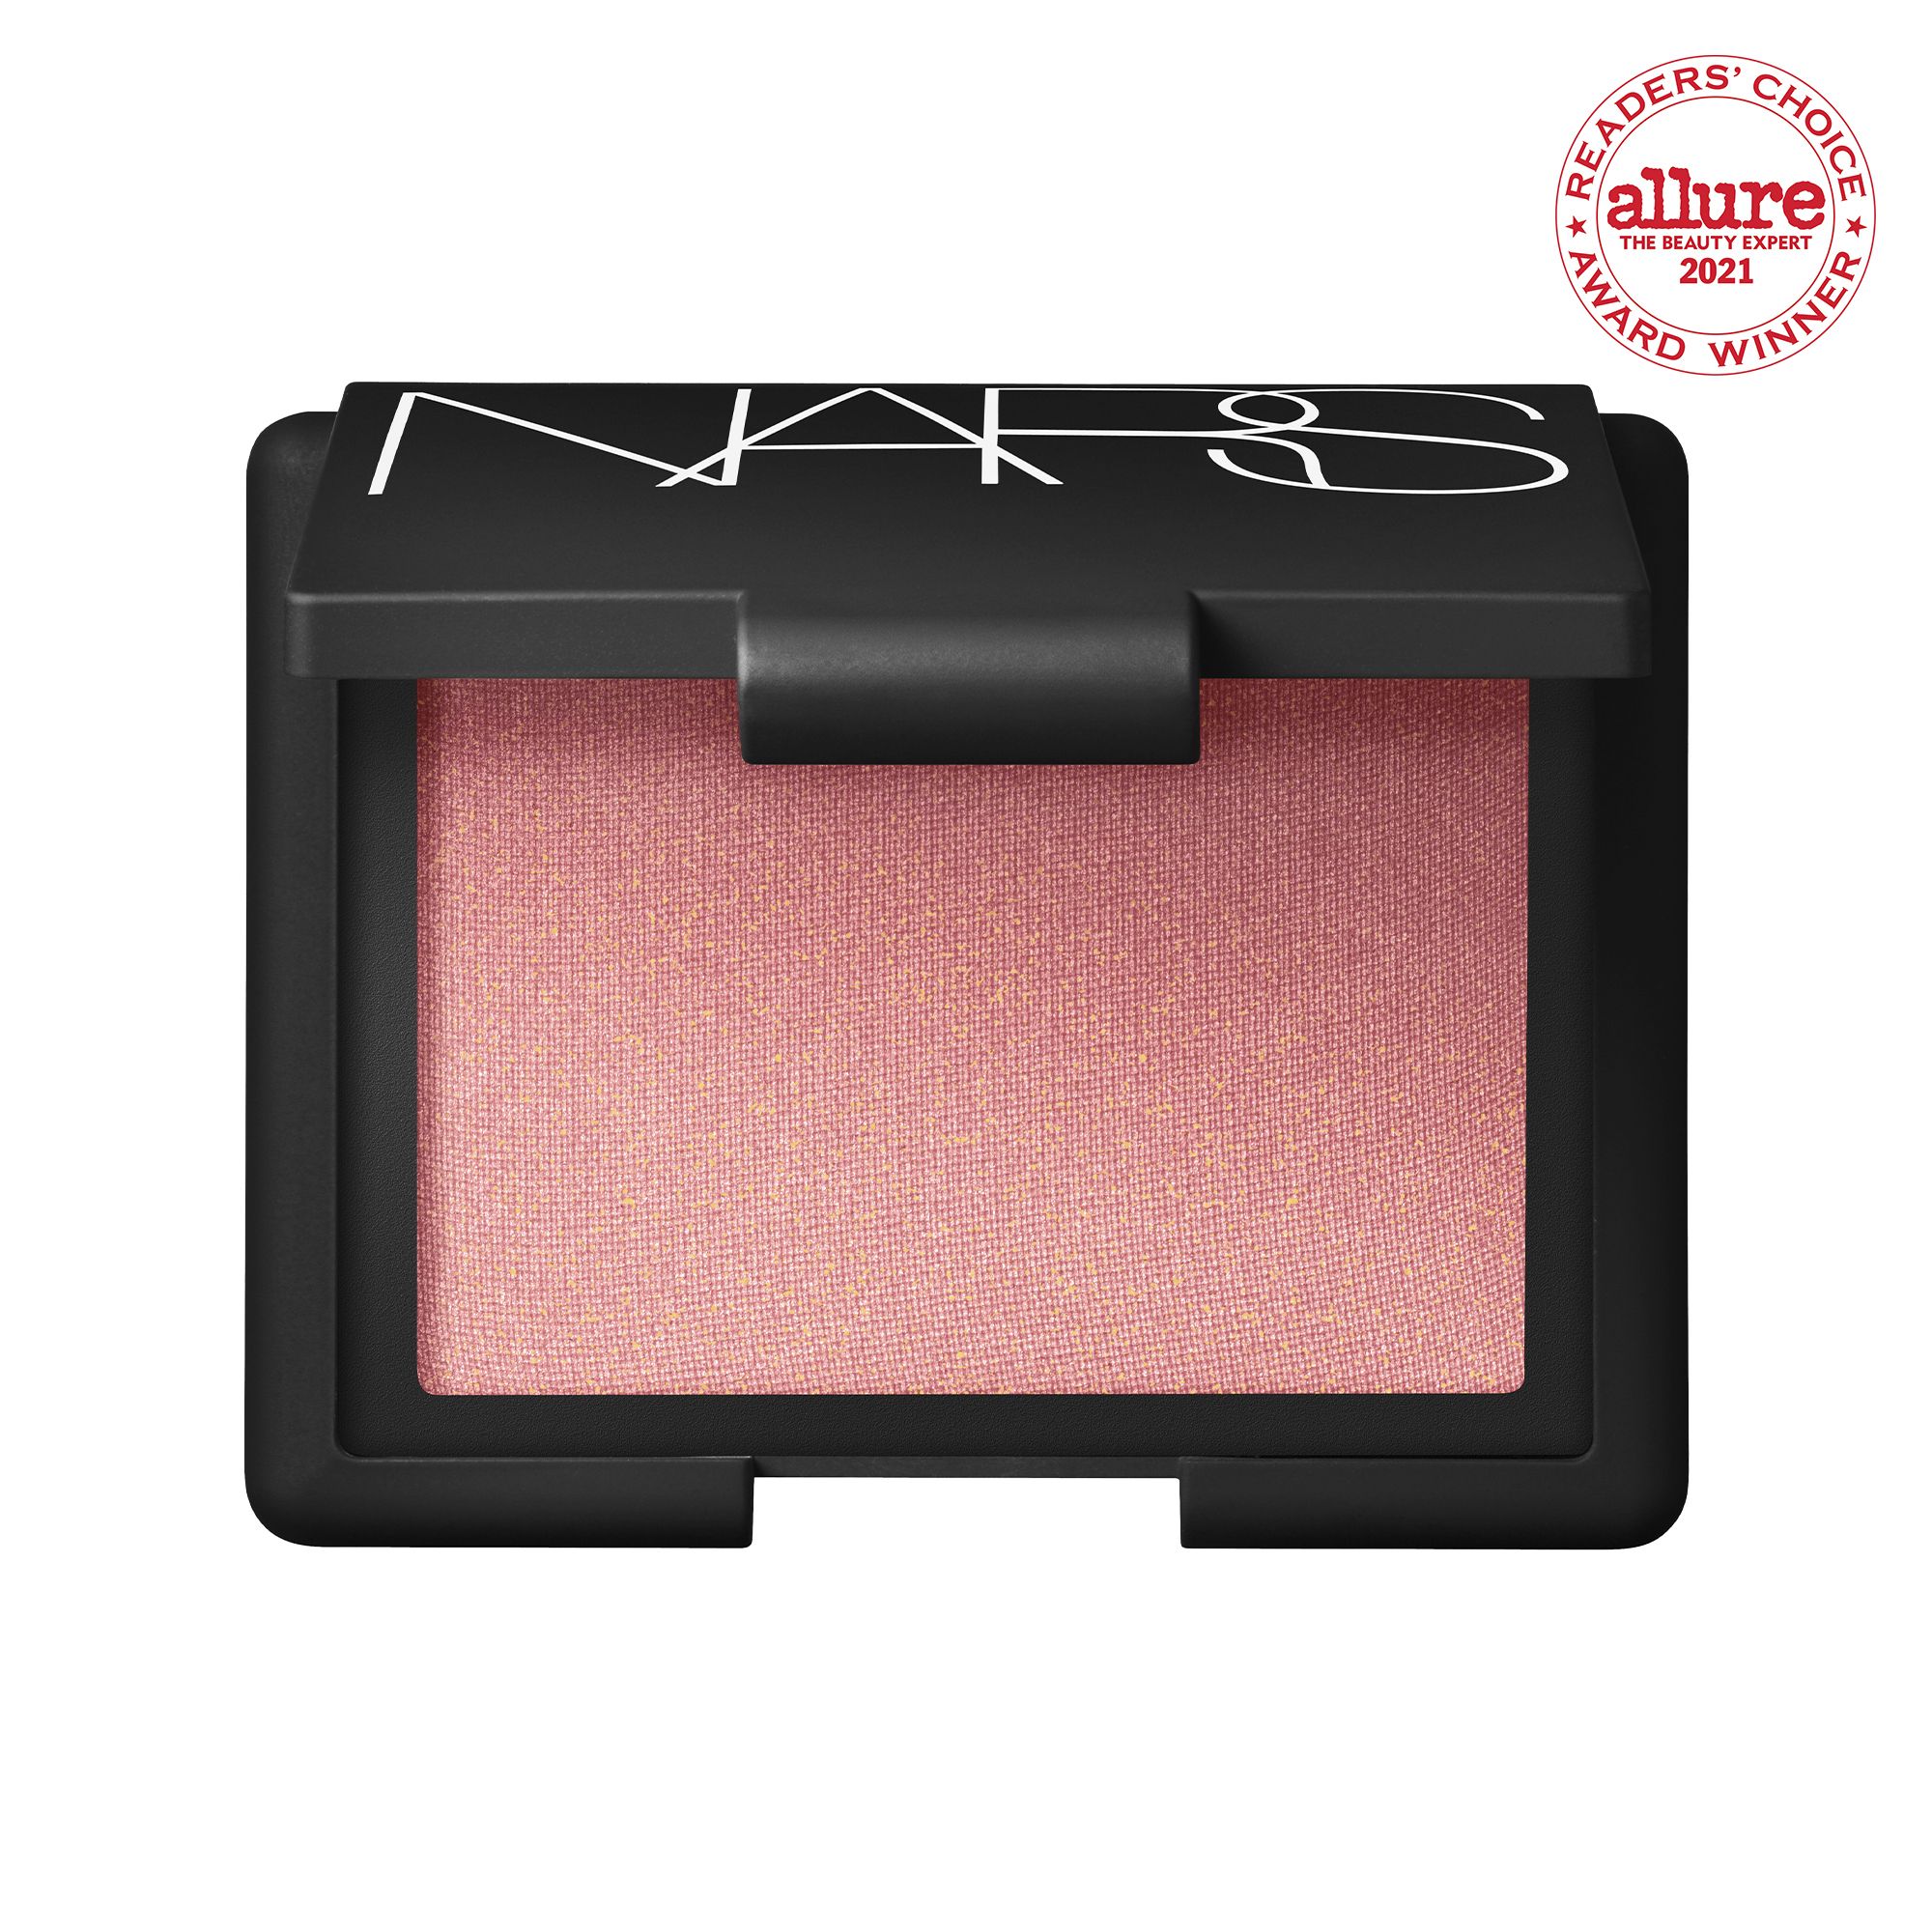 Orgasm
Peachy pink with golden shimmer | NARS (US)